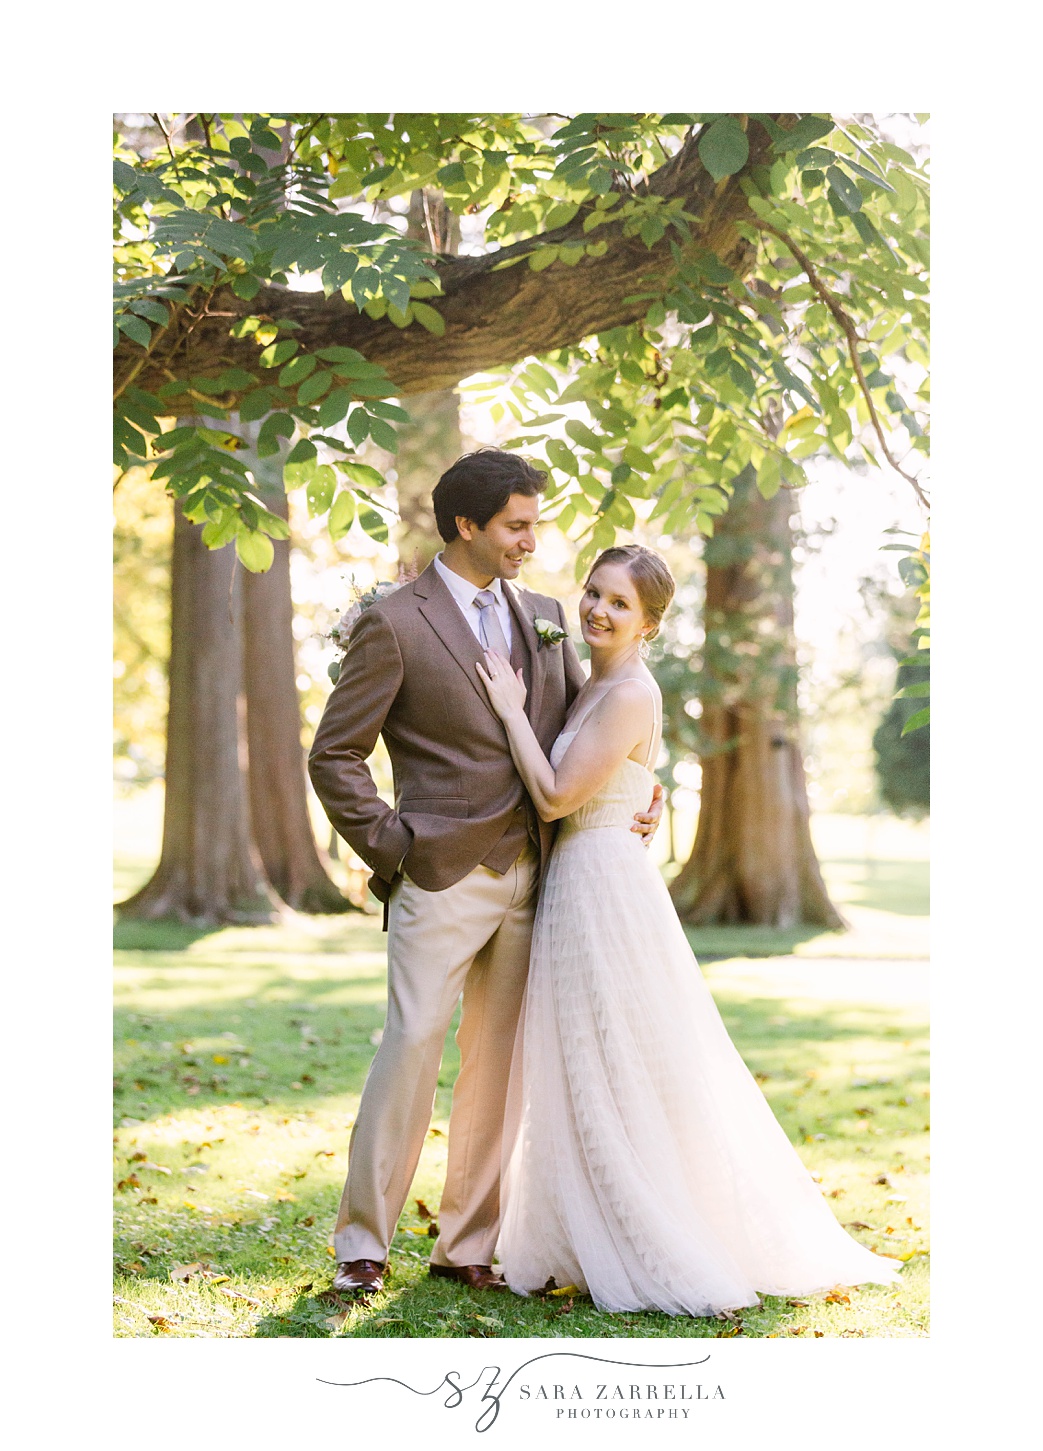 newlyweds pose under trees in field at Blithewold Mansion